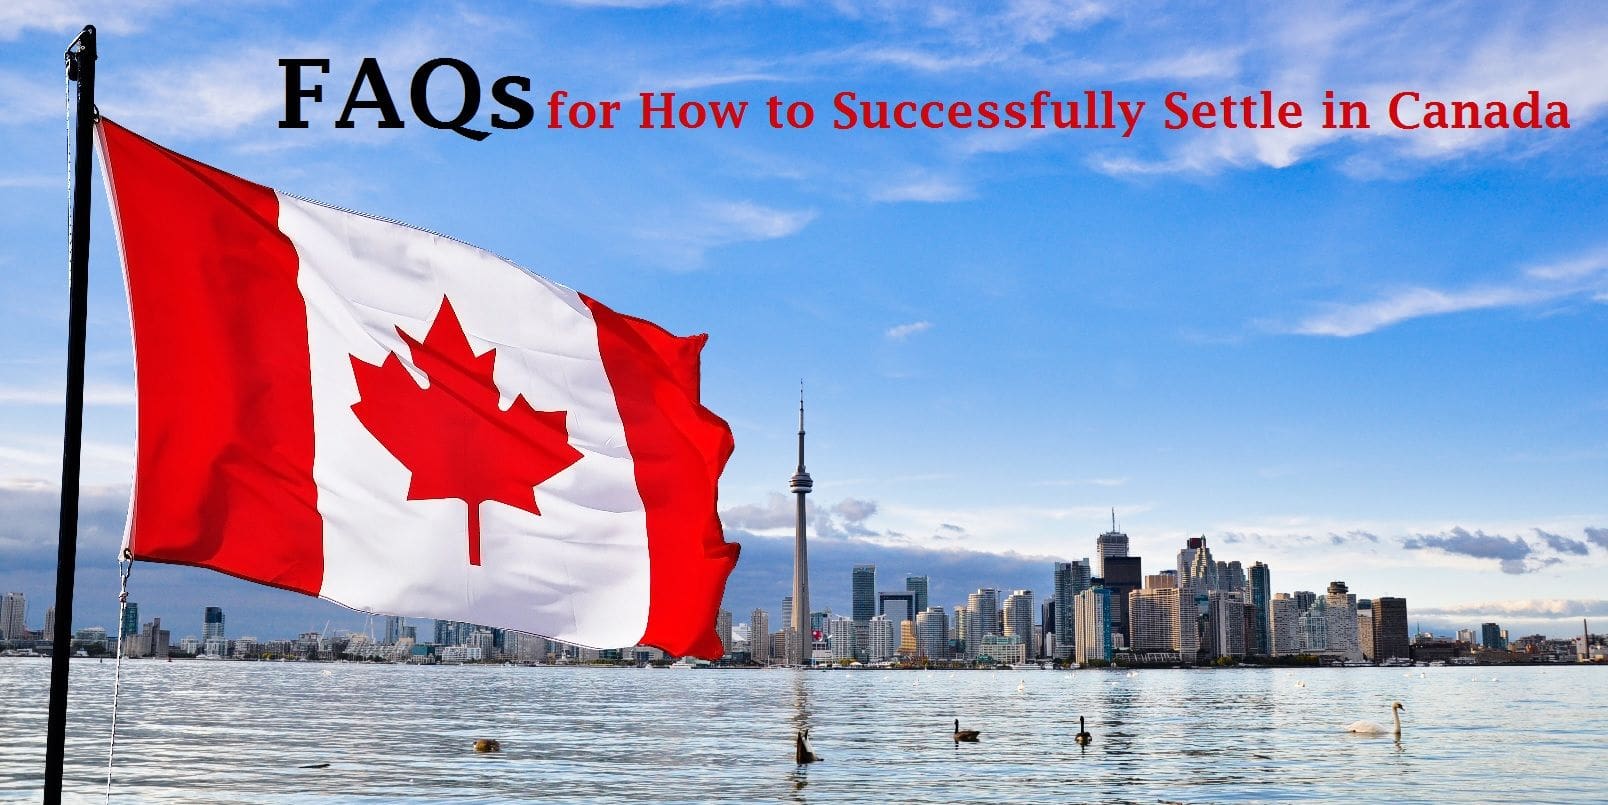 FAQs-for-How-to-Successfully-Settle-in-Canada.jpg